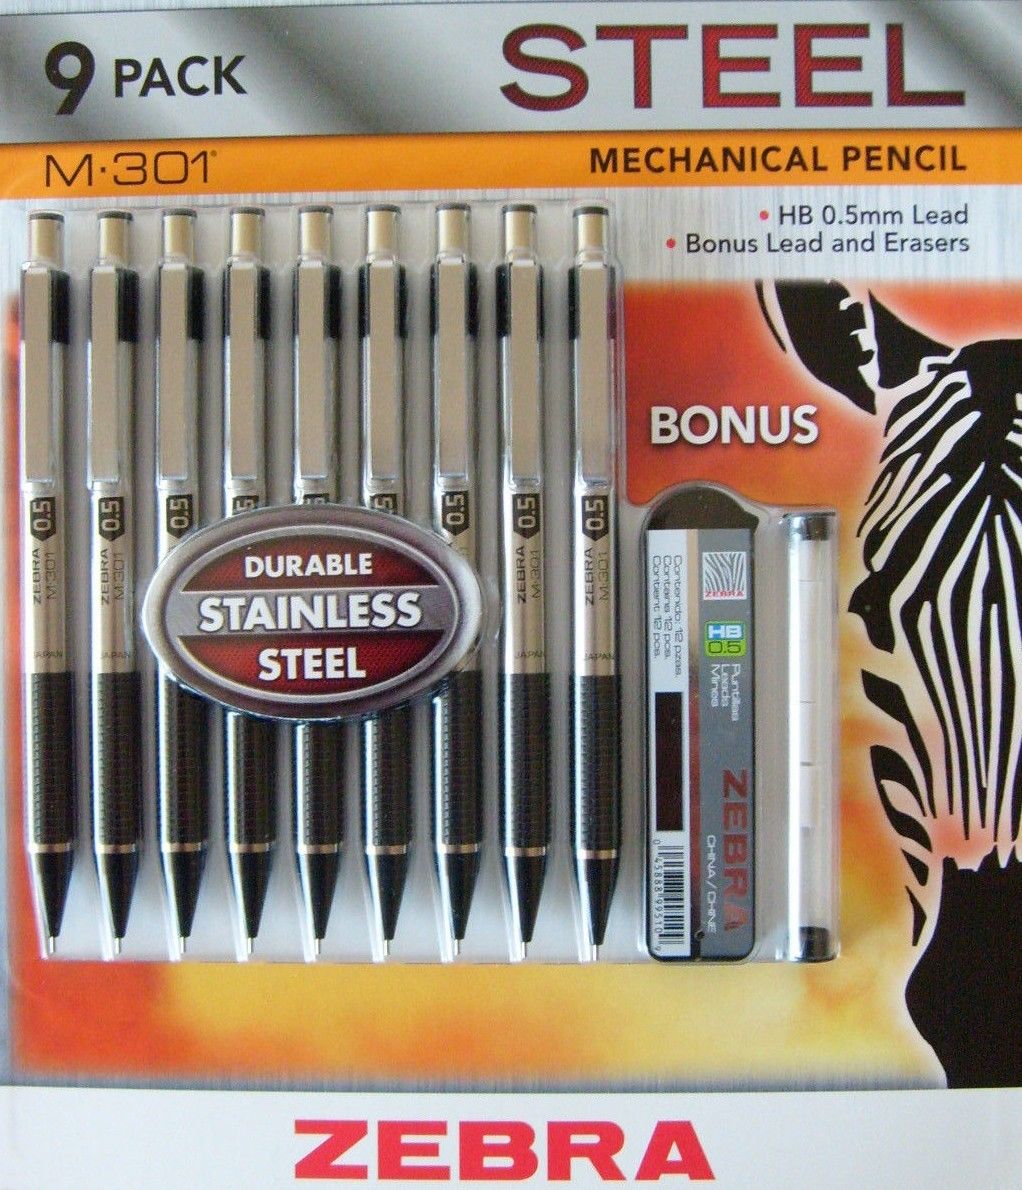 New 9pk Zebra M-301 Stainless Steel Mechanical Pencil -- US Delivery